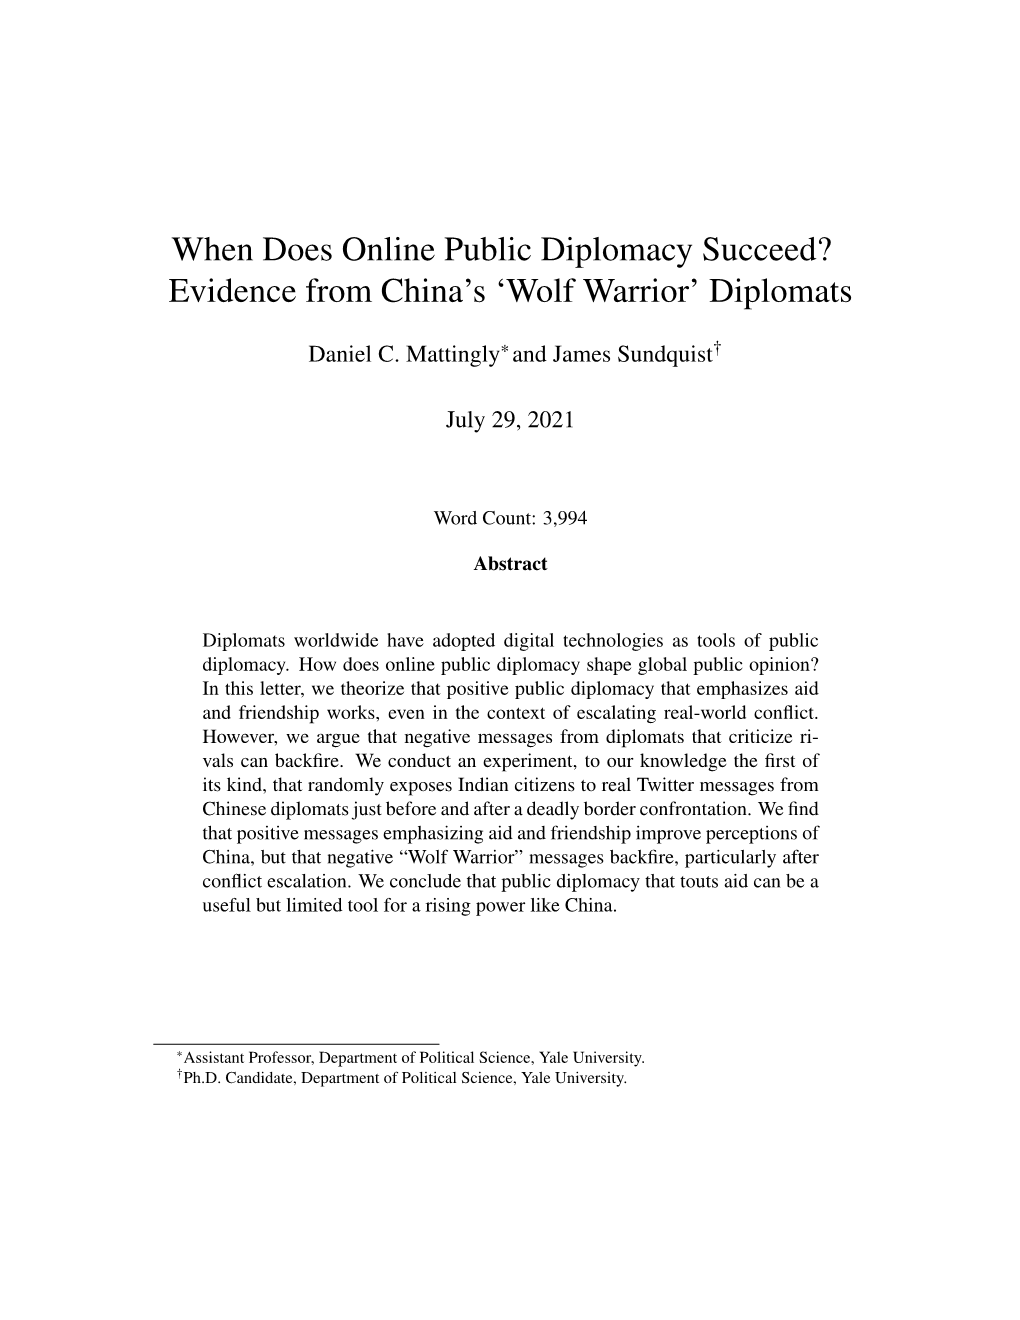 When Does Online Public Diplomacy Succeed? Evidence from China's 'Wolf Warrior' Diplomats